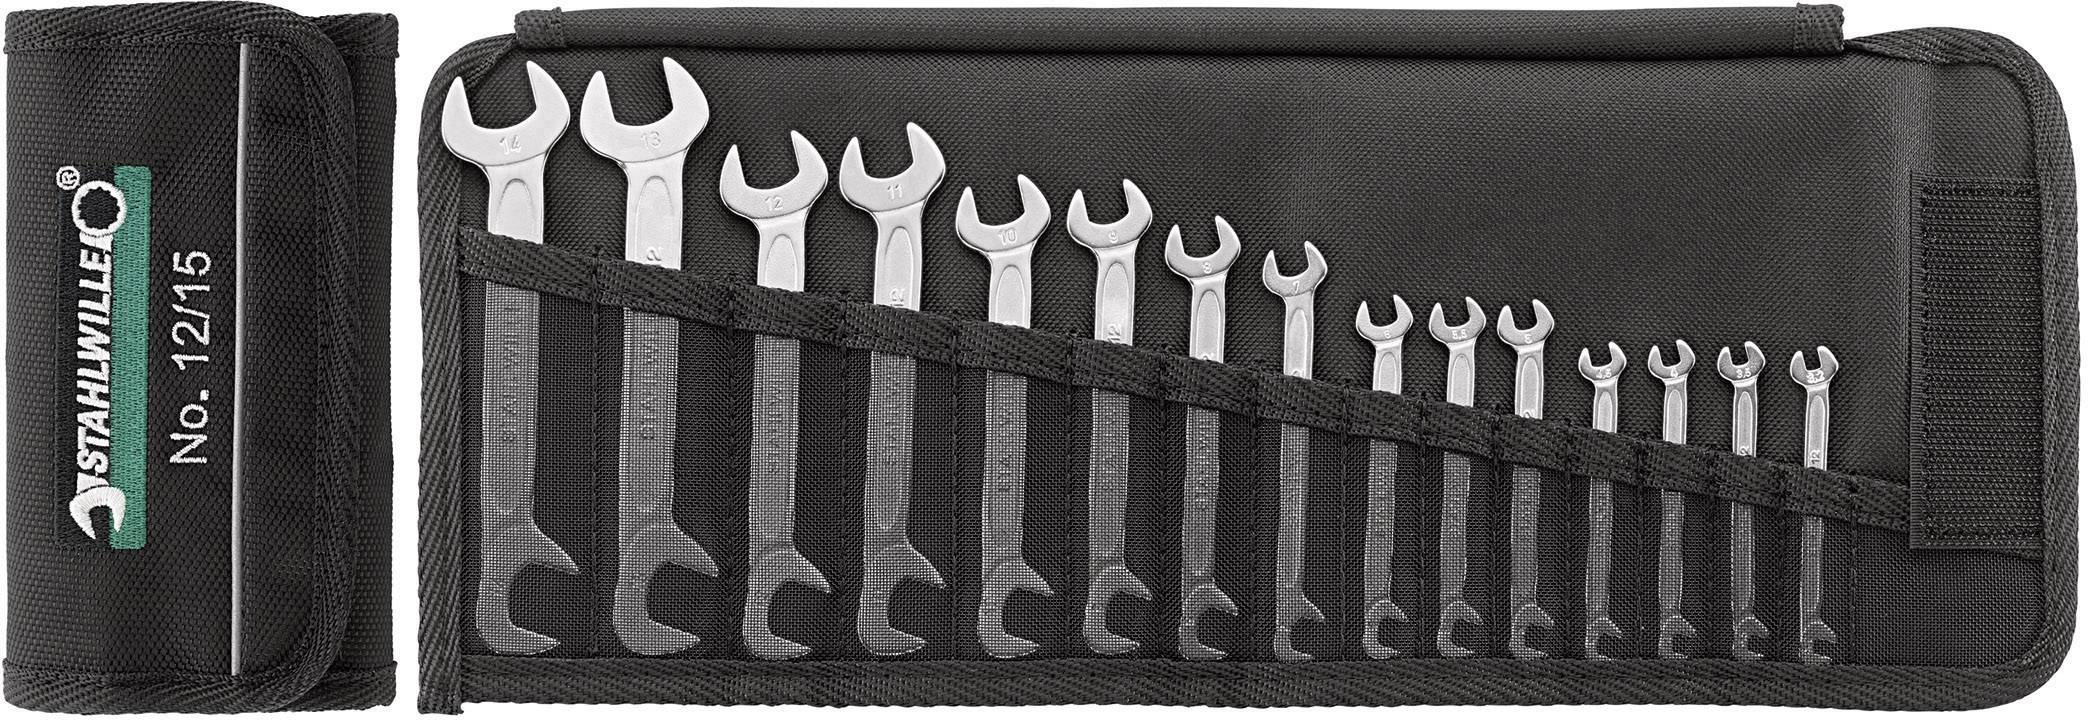 Stahlwille 96410704 Double Ended Ring Wrench Set Corona, 6mm x 7mm to 20mm  x 22mm, Shallow Offset, Chrome Alloy Steel, Chrome Plated, No.23/8, 8 pcs:  Amazon.com: Tools & Home Improvement